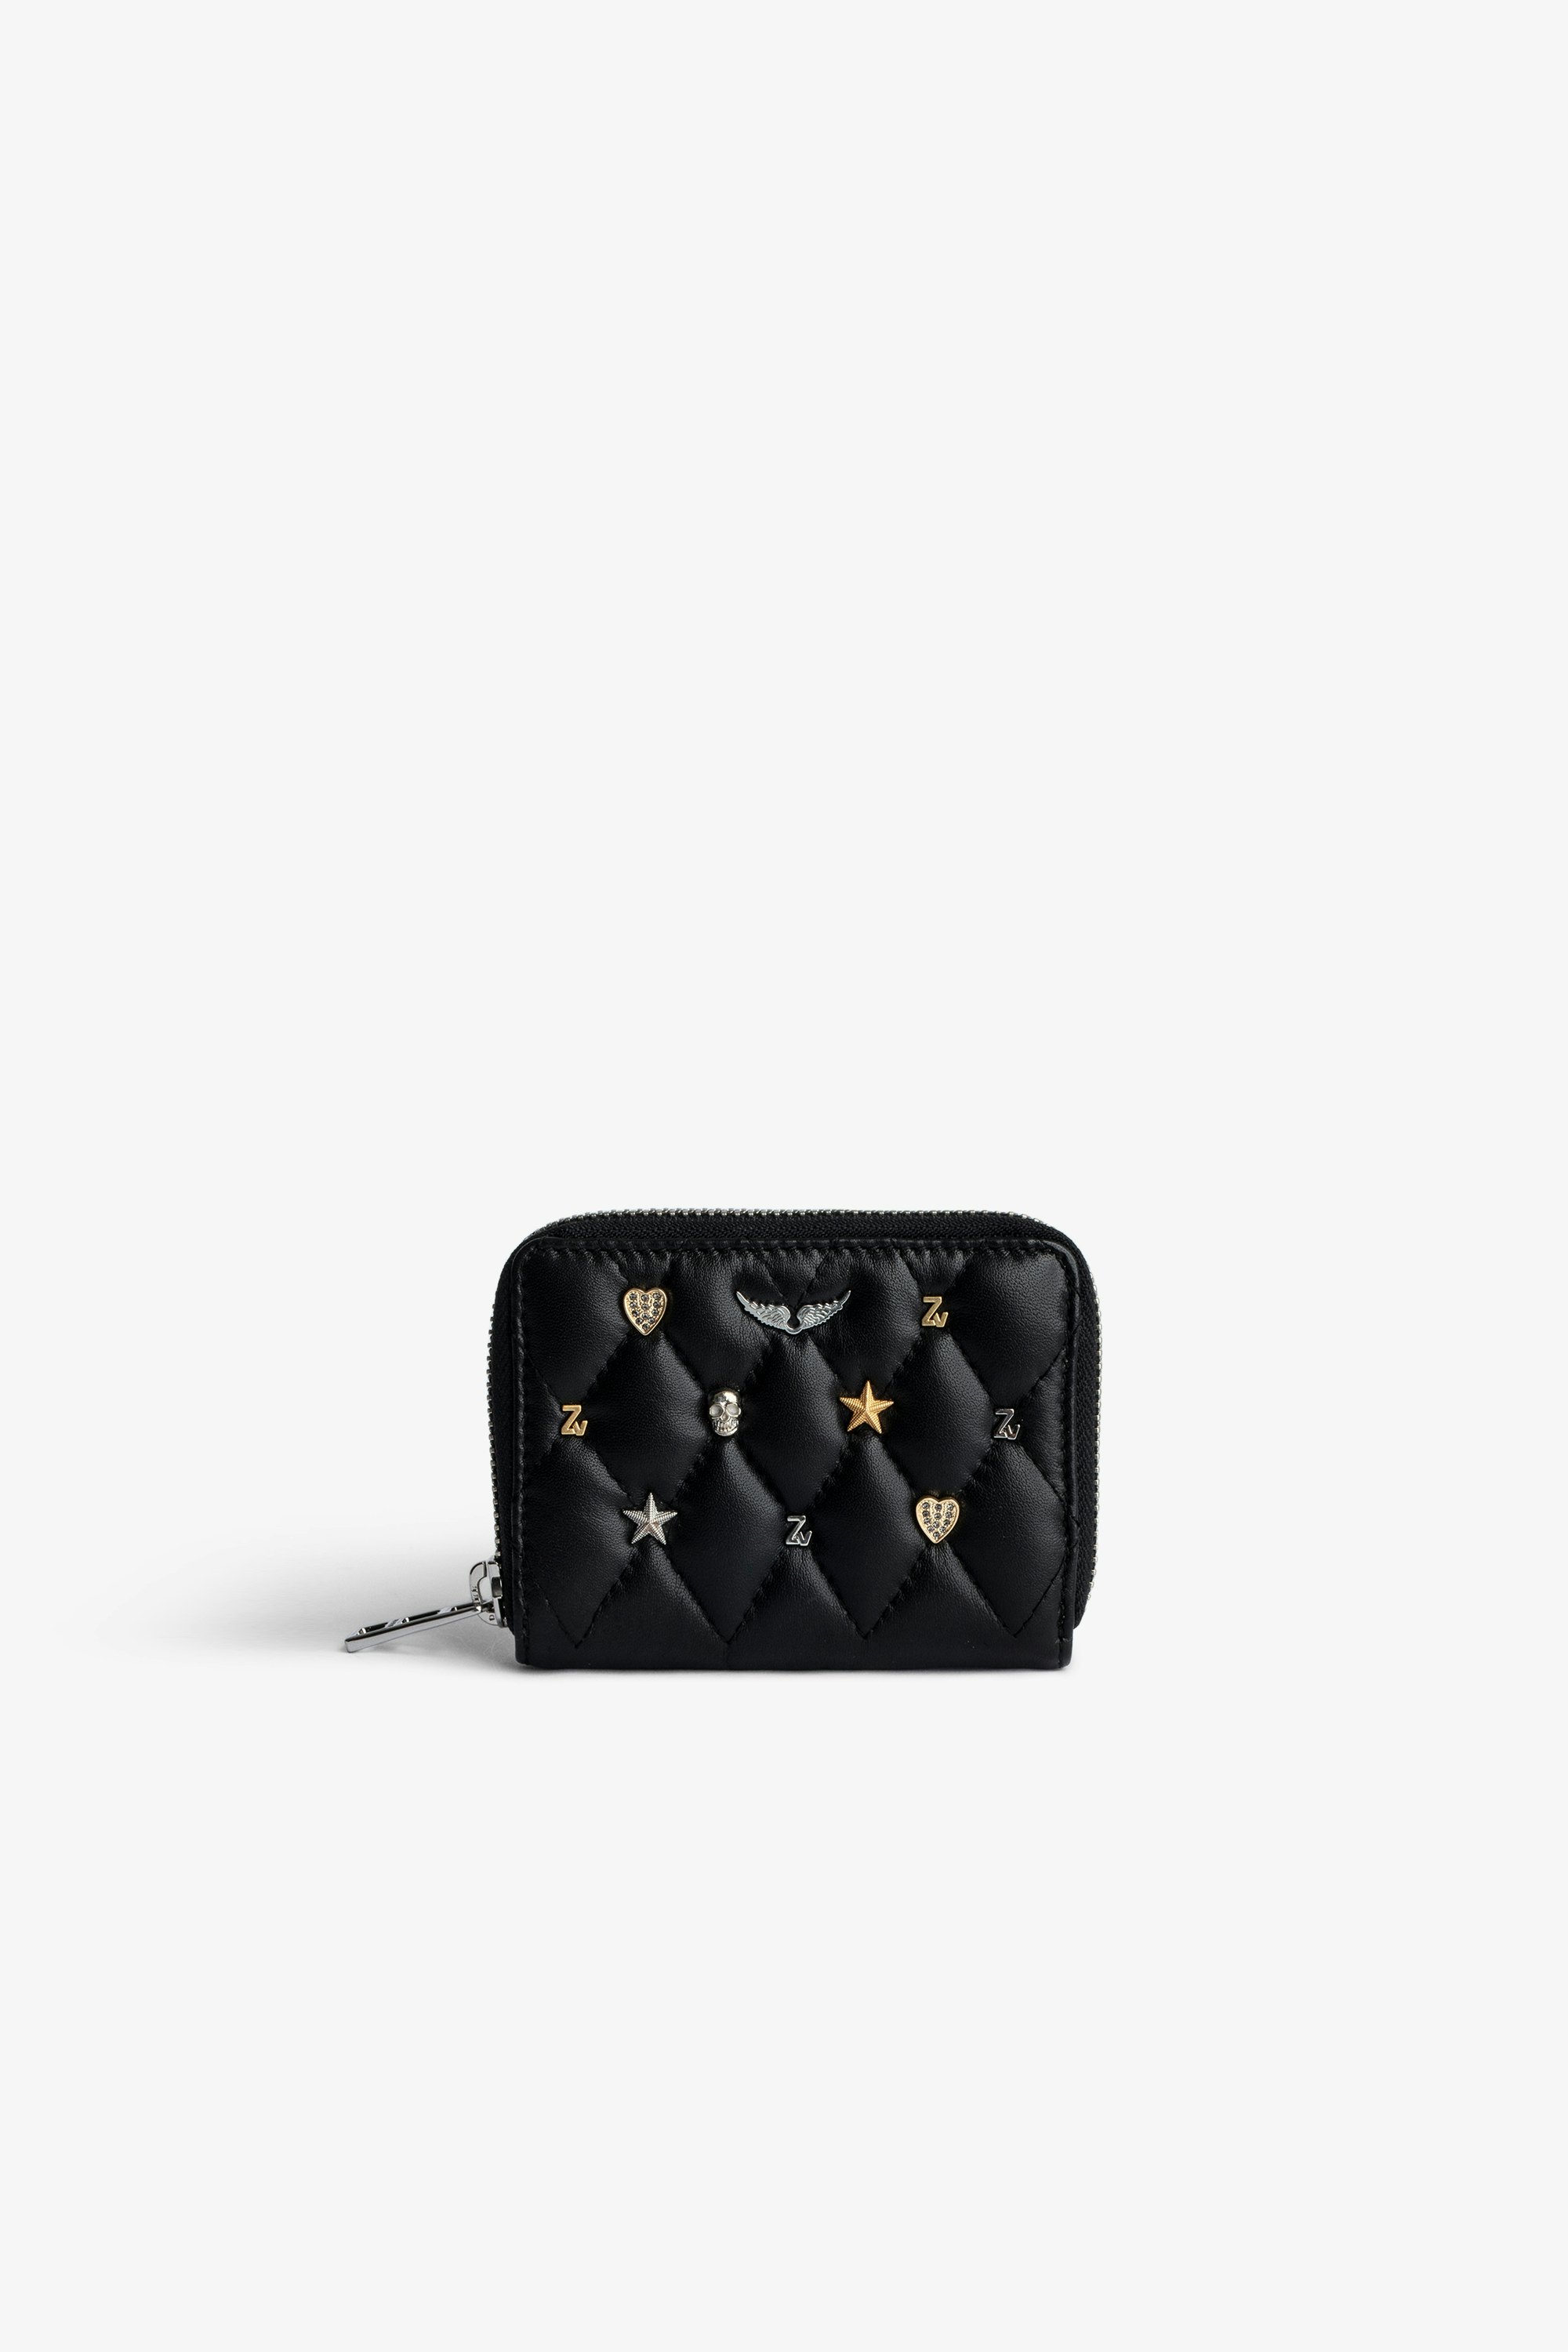 Mini ZV Coin Purse - Women’s black quilted leather coin purse with silver- and gold-tone charms.